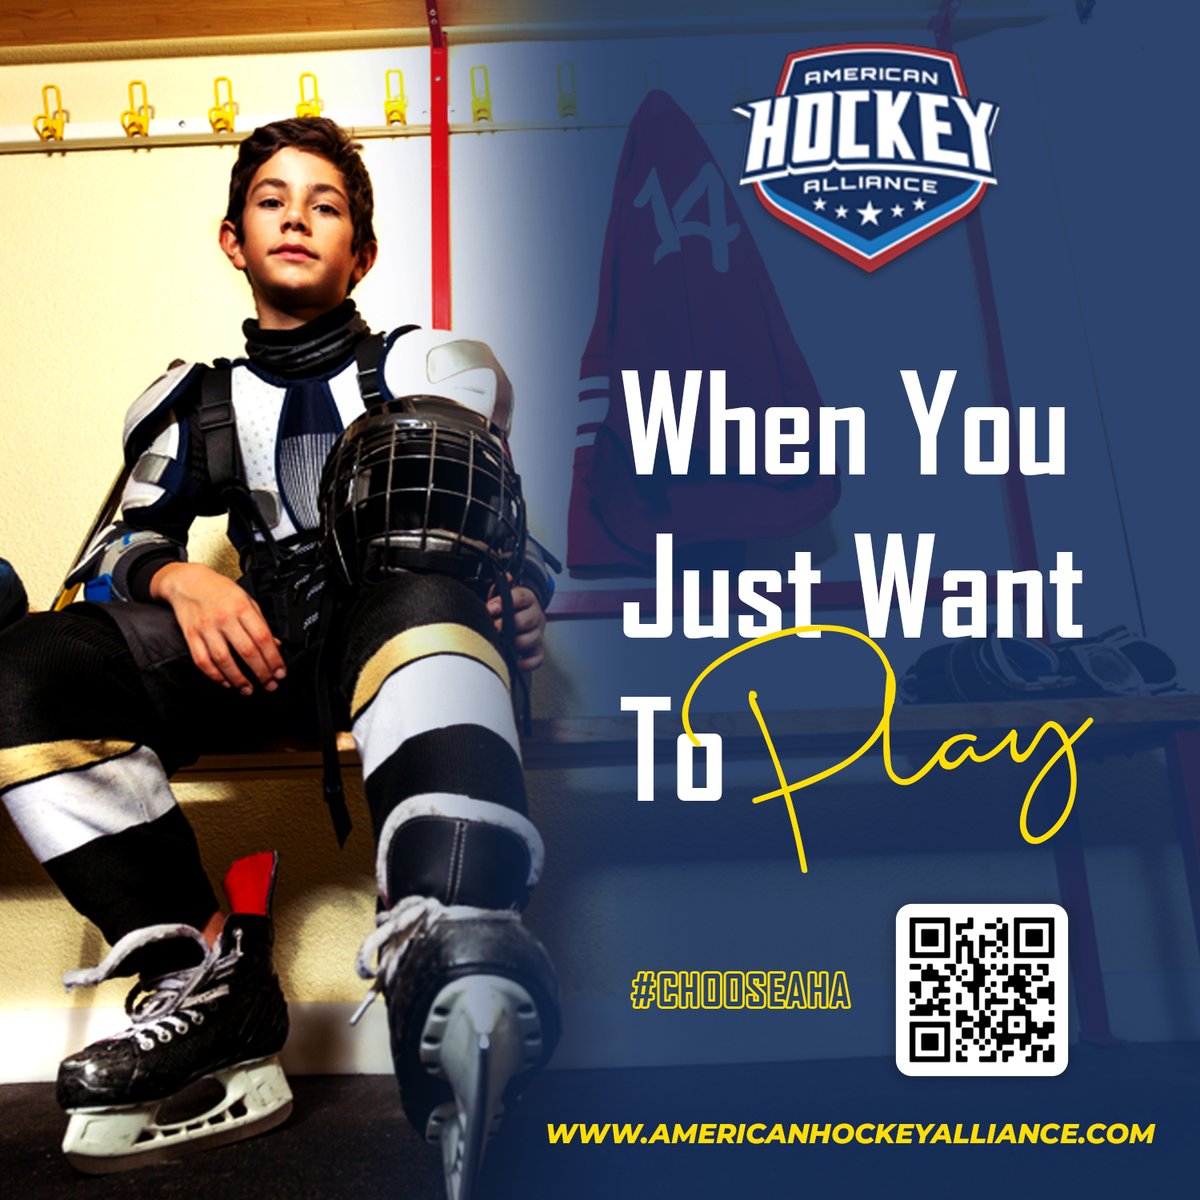 It’s a simple game for kids. It’s the adults that make it hard. It’s time to get back to the basics. #chooseaha 
.
.
.
.
.
.
#icehockey #icehockeyplayer #icehockey #icehockeylife #icehockeygame #icehockeyplayers #icehockeygoalie #icehockeyUSA